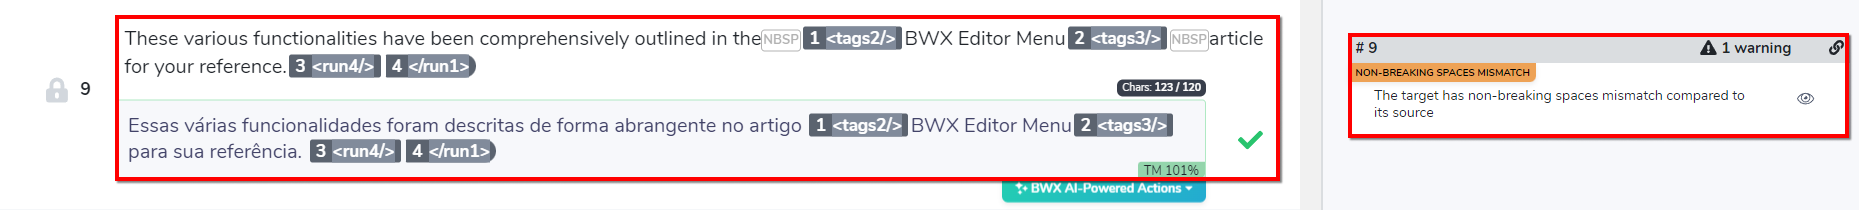 How to use the BWX QA Check Tool - November 2023 Update - 2.png